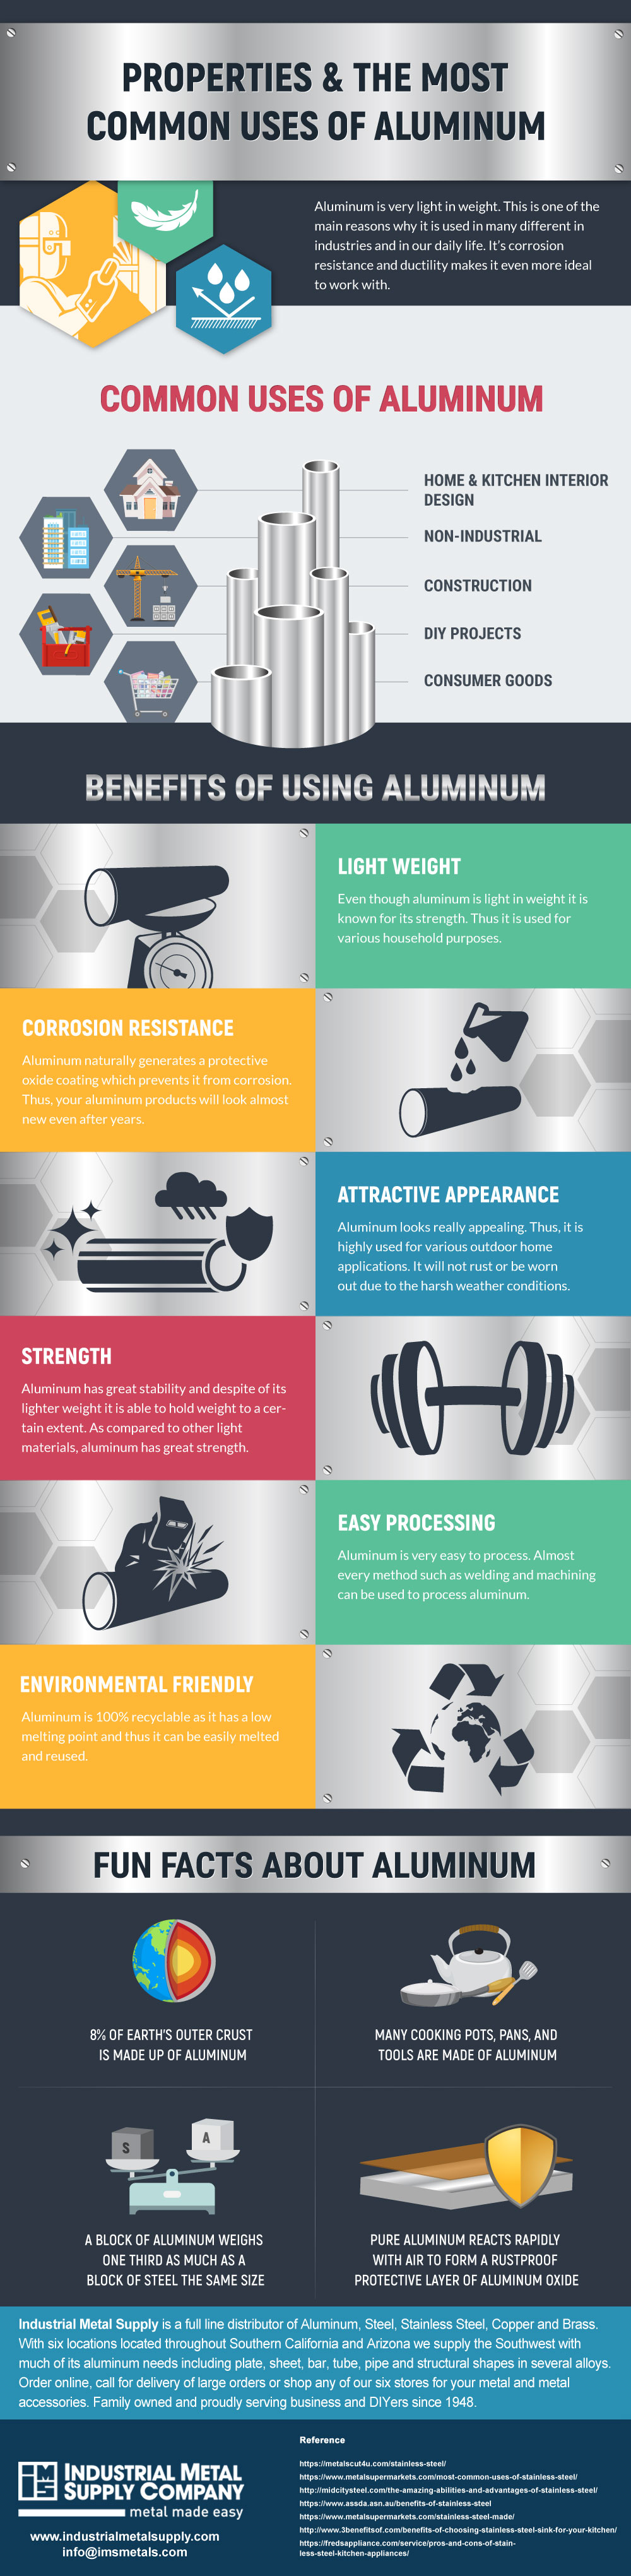 infographic with most common uses and properties of aluminum